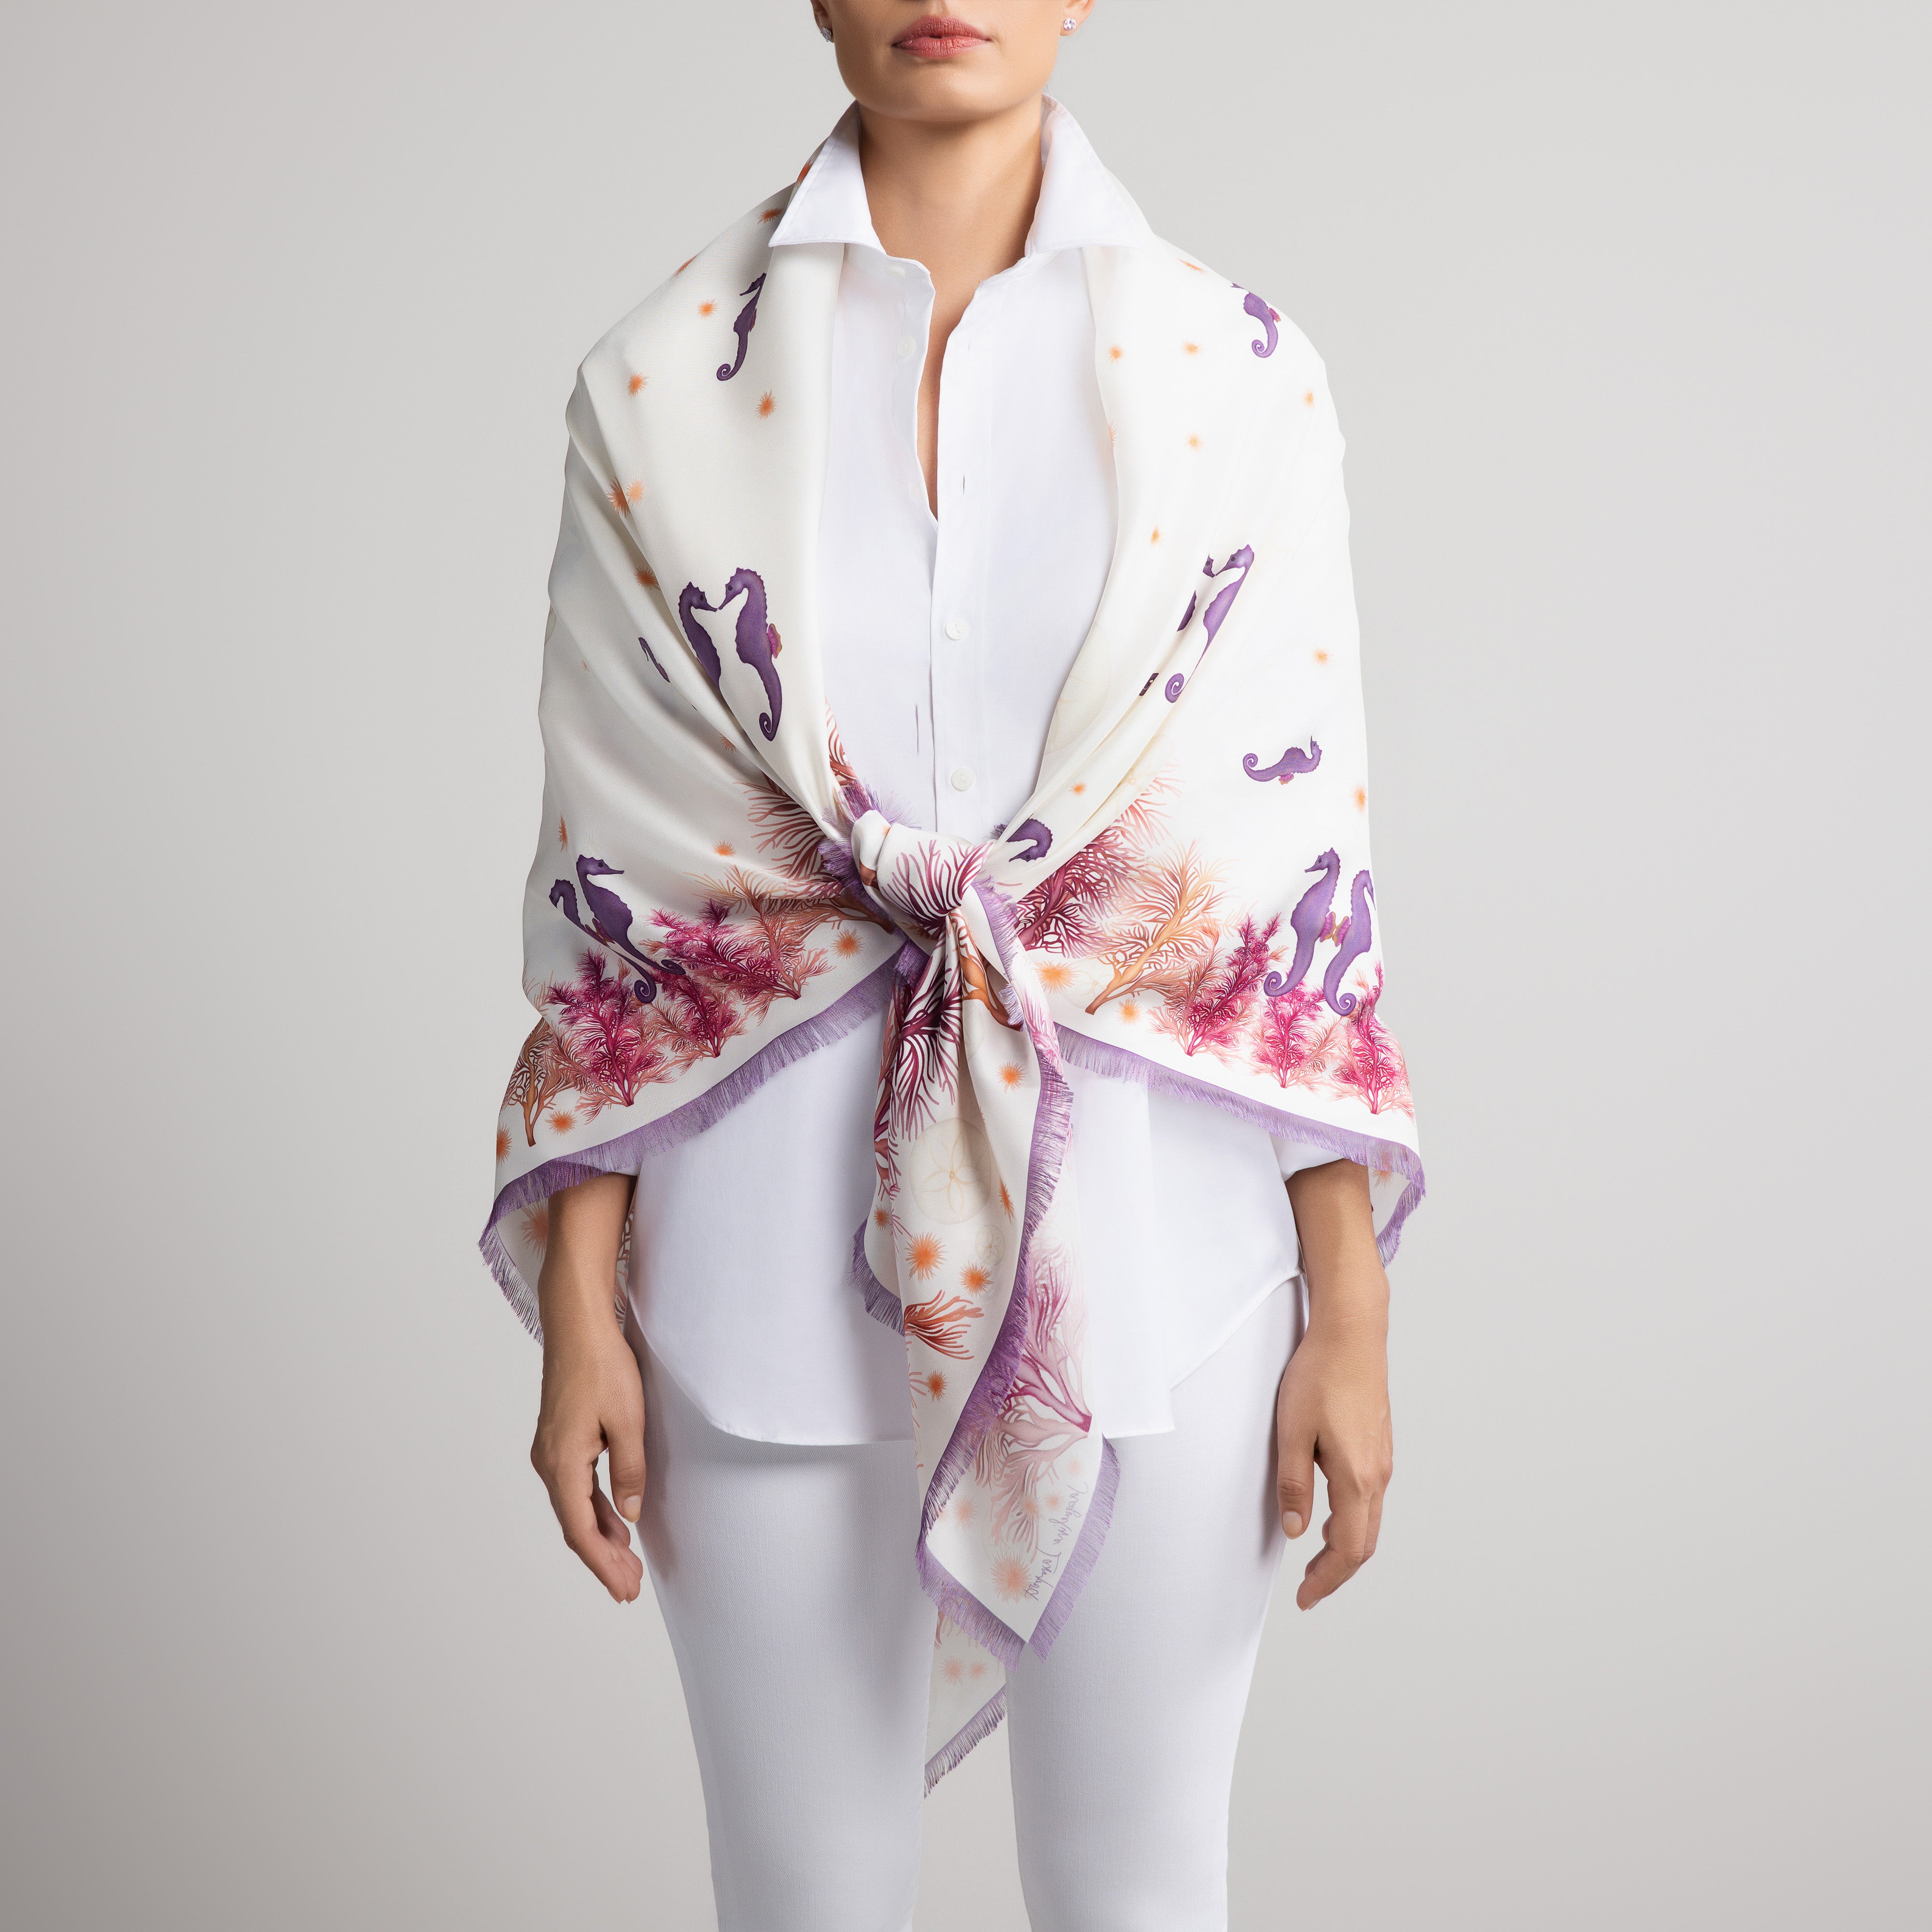 Galapagos Grande Silk Scarf in Cream with Hand-Feathered Edges